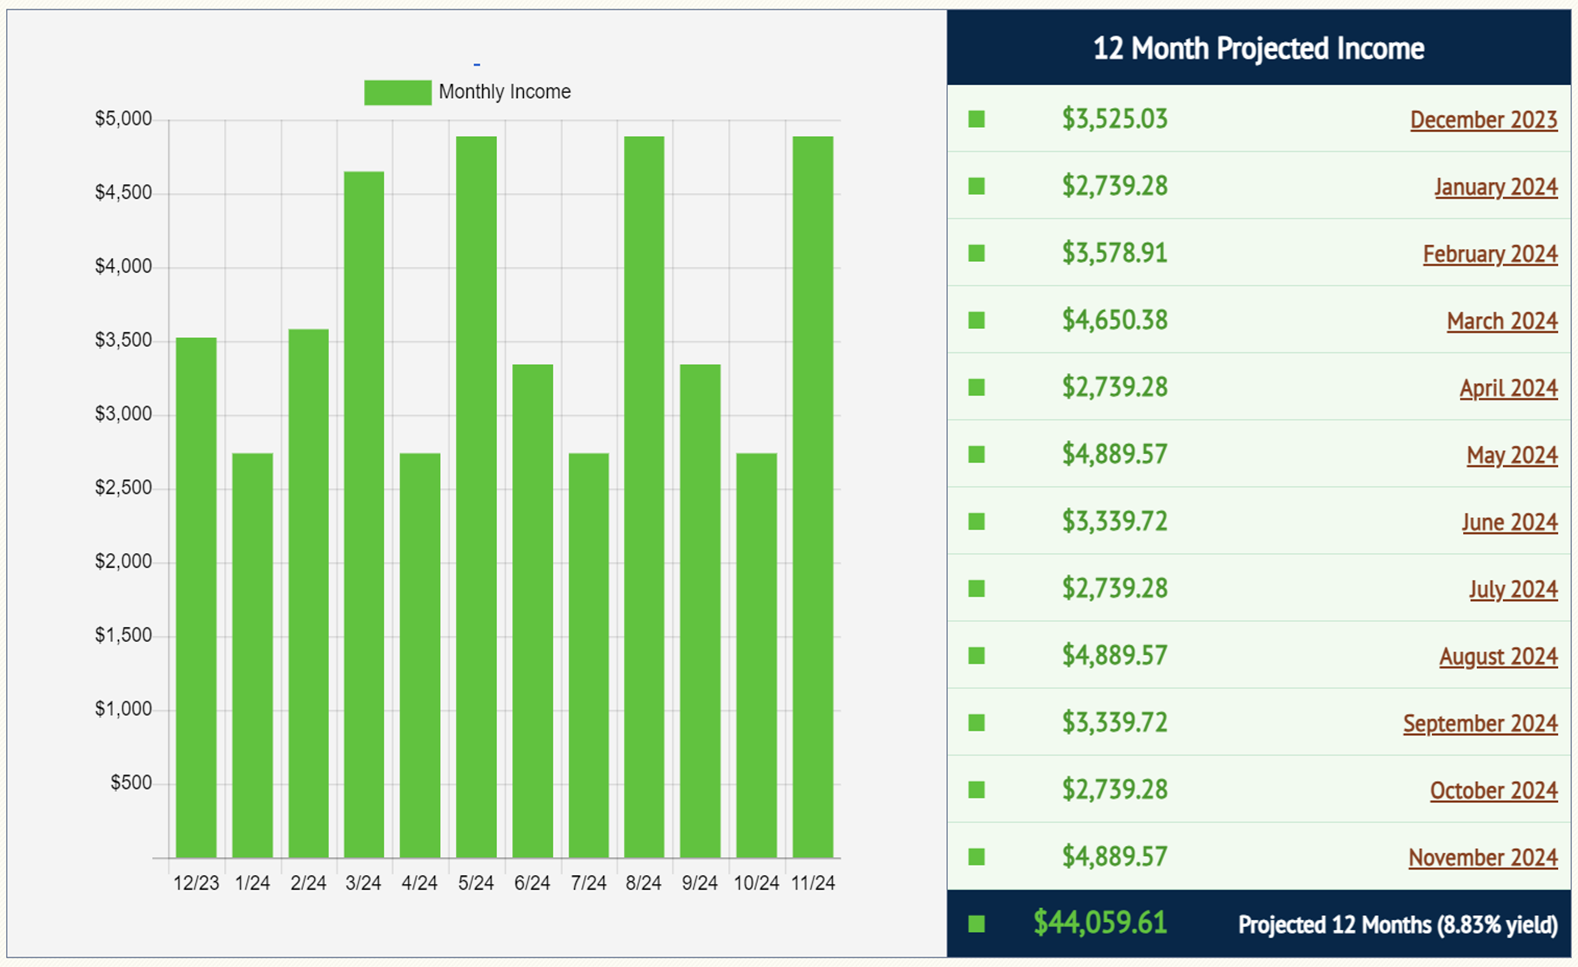 Income Calendar Example: 12 month projected income